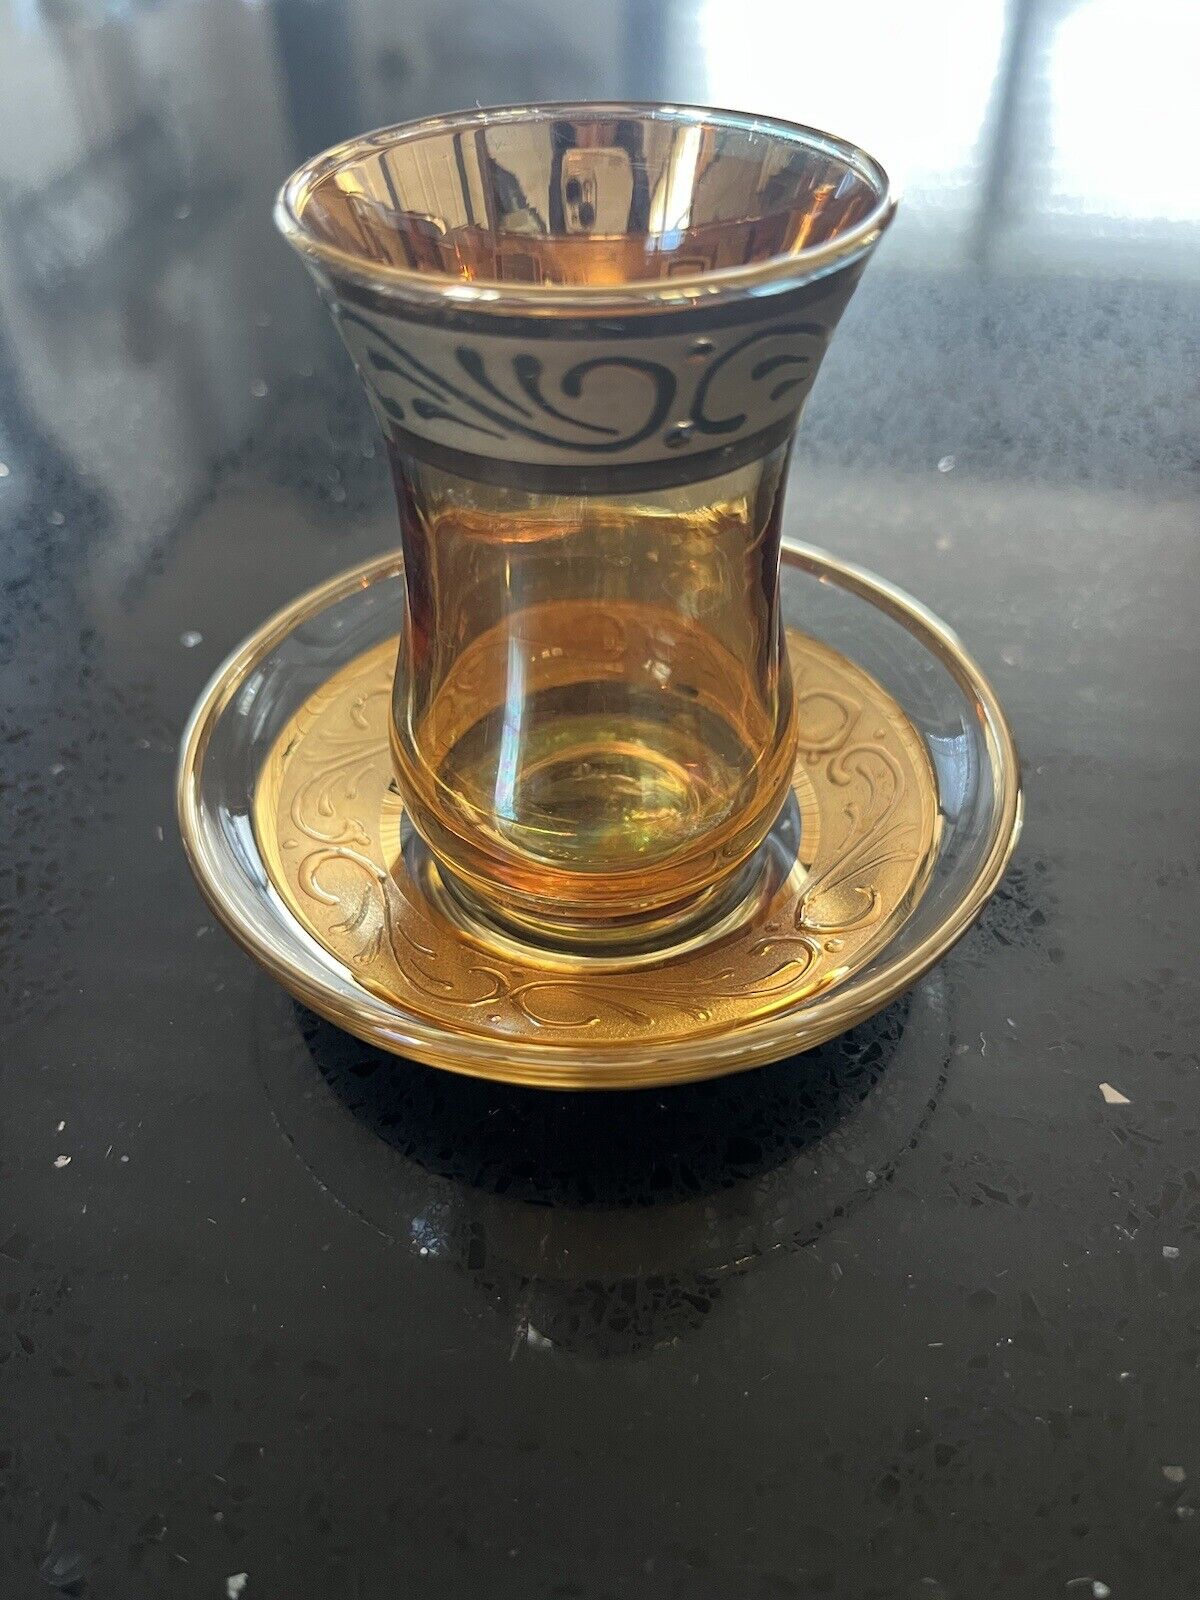 VTG Pasabahce Turkish Tea Cup And Saucer, Gold Tone Gilded And Scroll Design